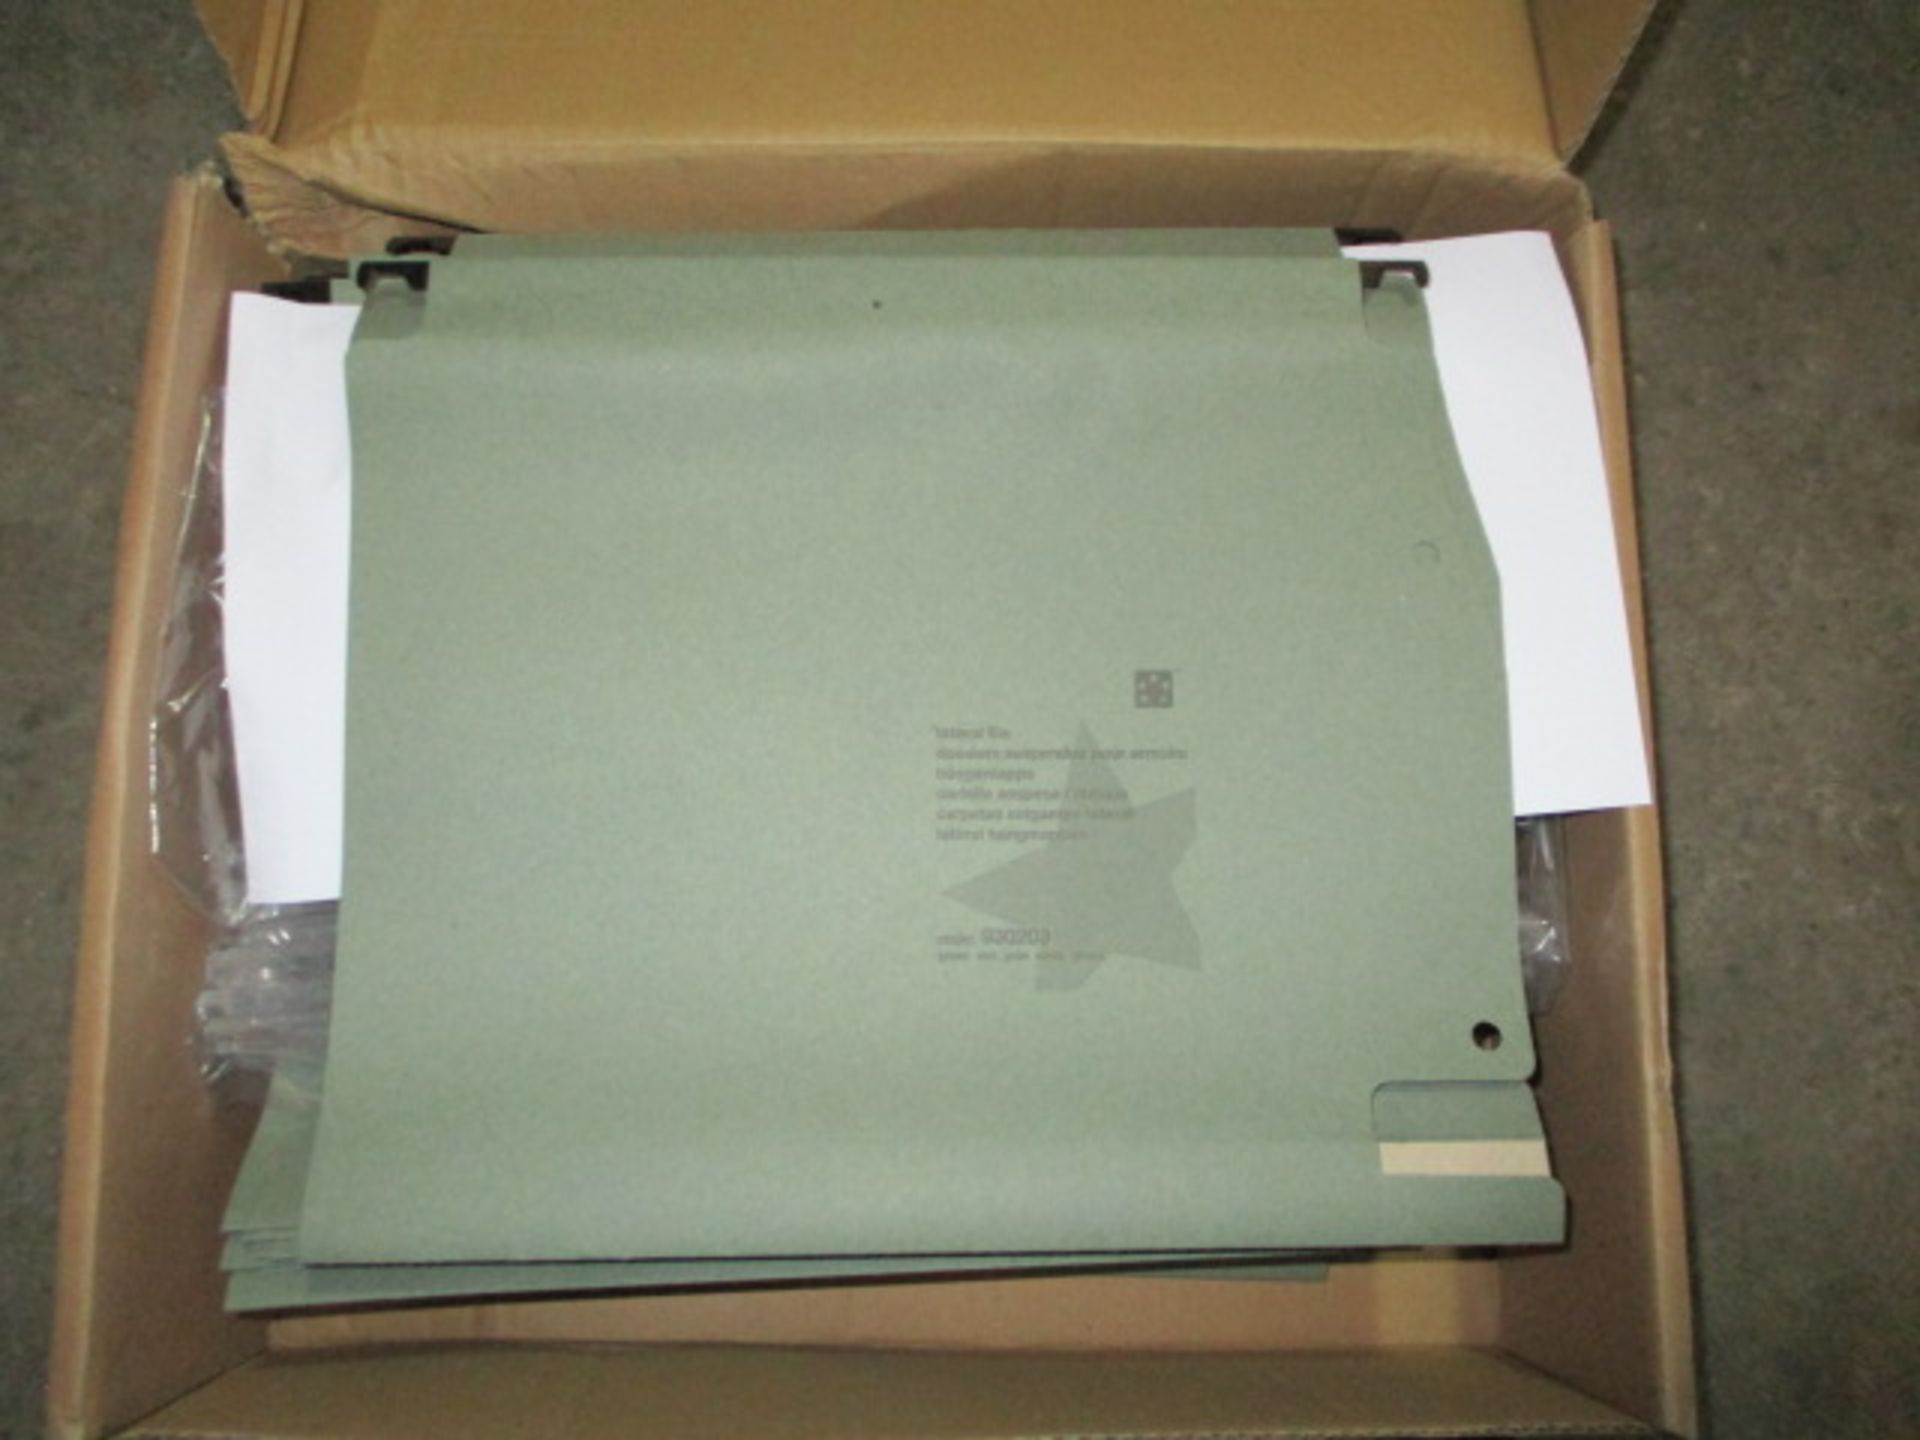 1 x Pallet of 5 Star Lateral Suspension Files - Approximately 48 Boxes of 50 Files in Total - RRP £